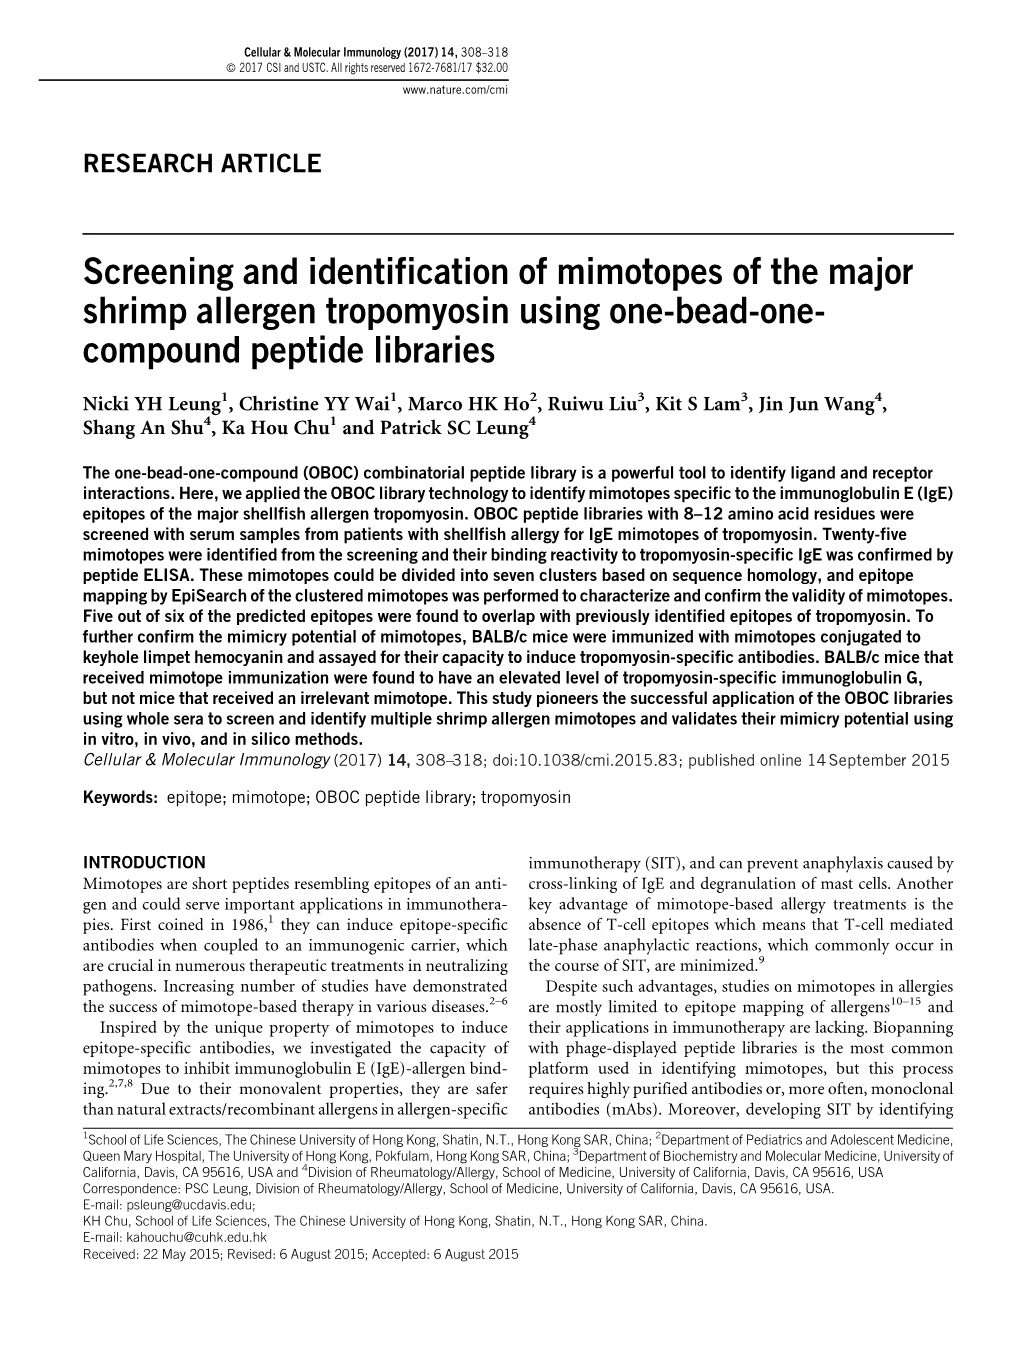 Screening and Identification of Mimotopes of the Major Shrimp Allergen Tropomyosin Using One-Bead-One-Compound Peptide Libraries